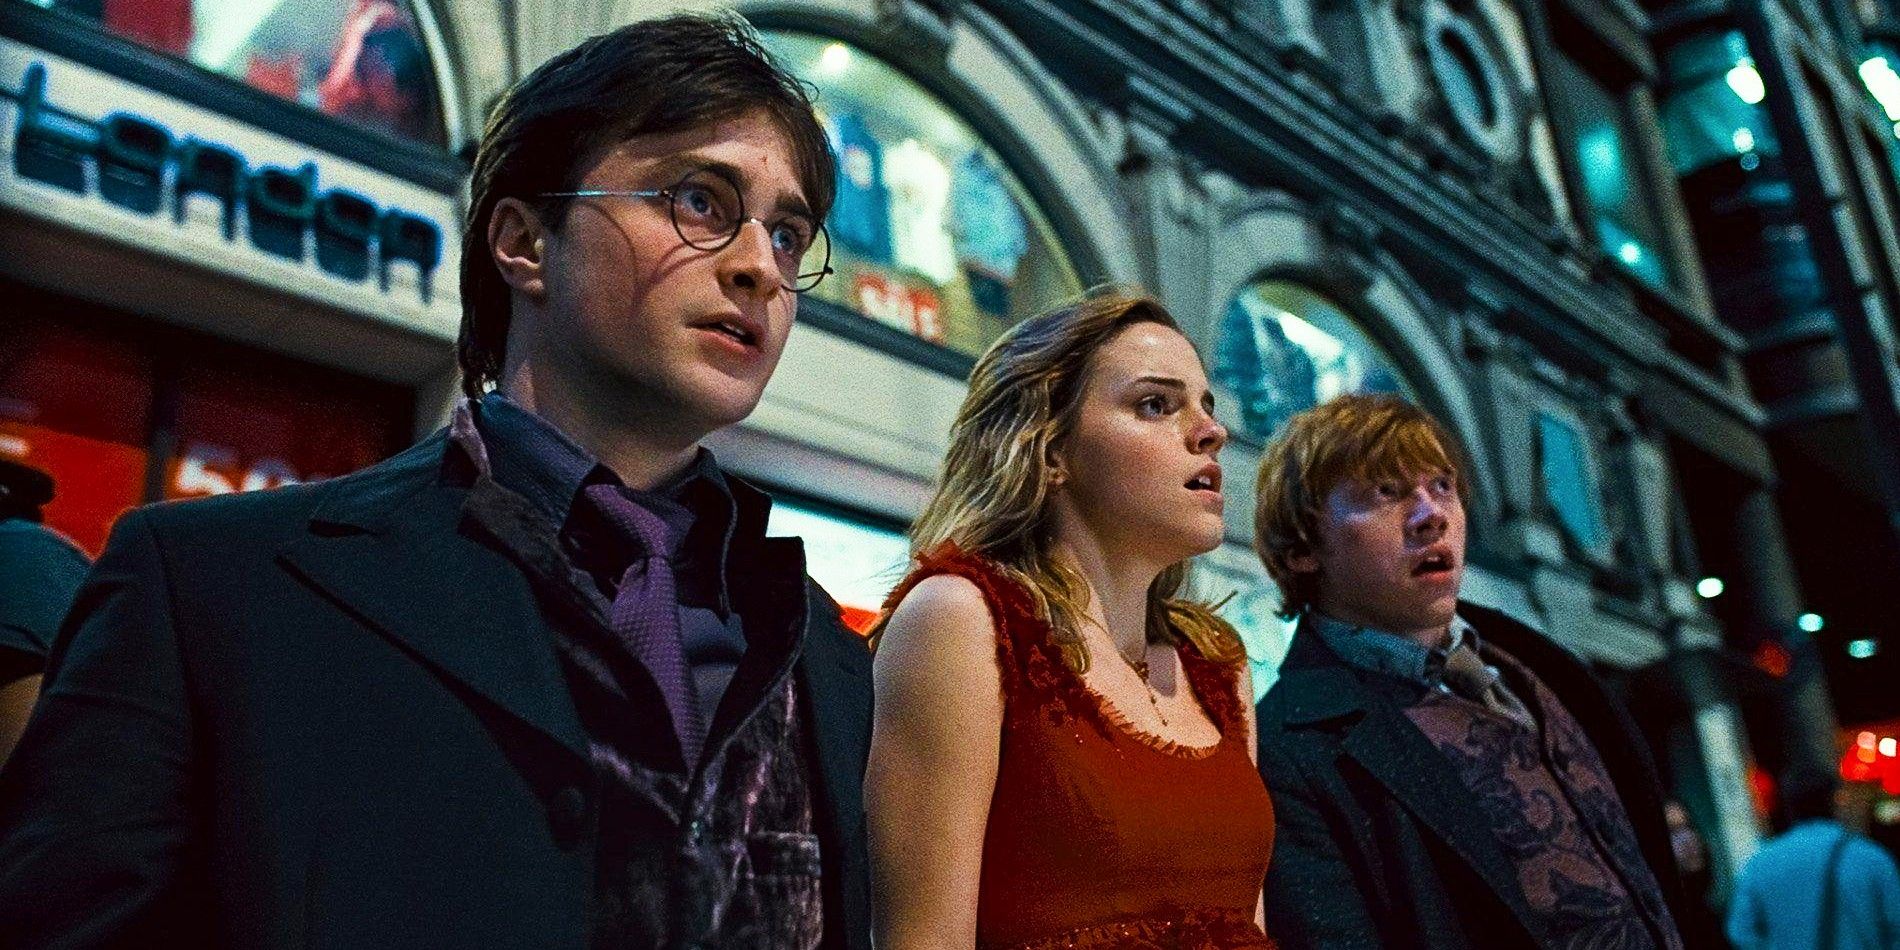 Harry Ron and Hermione arrive in London in Harry Potter